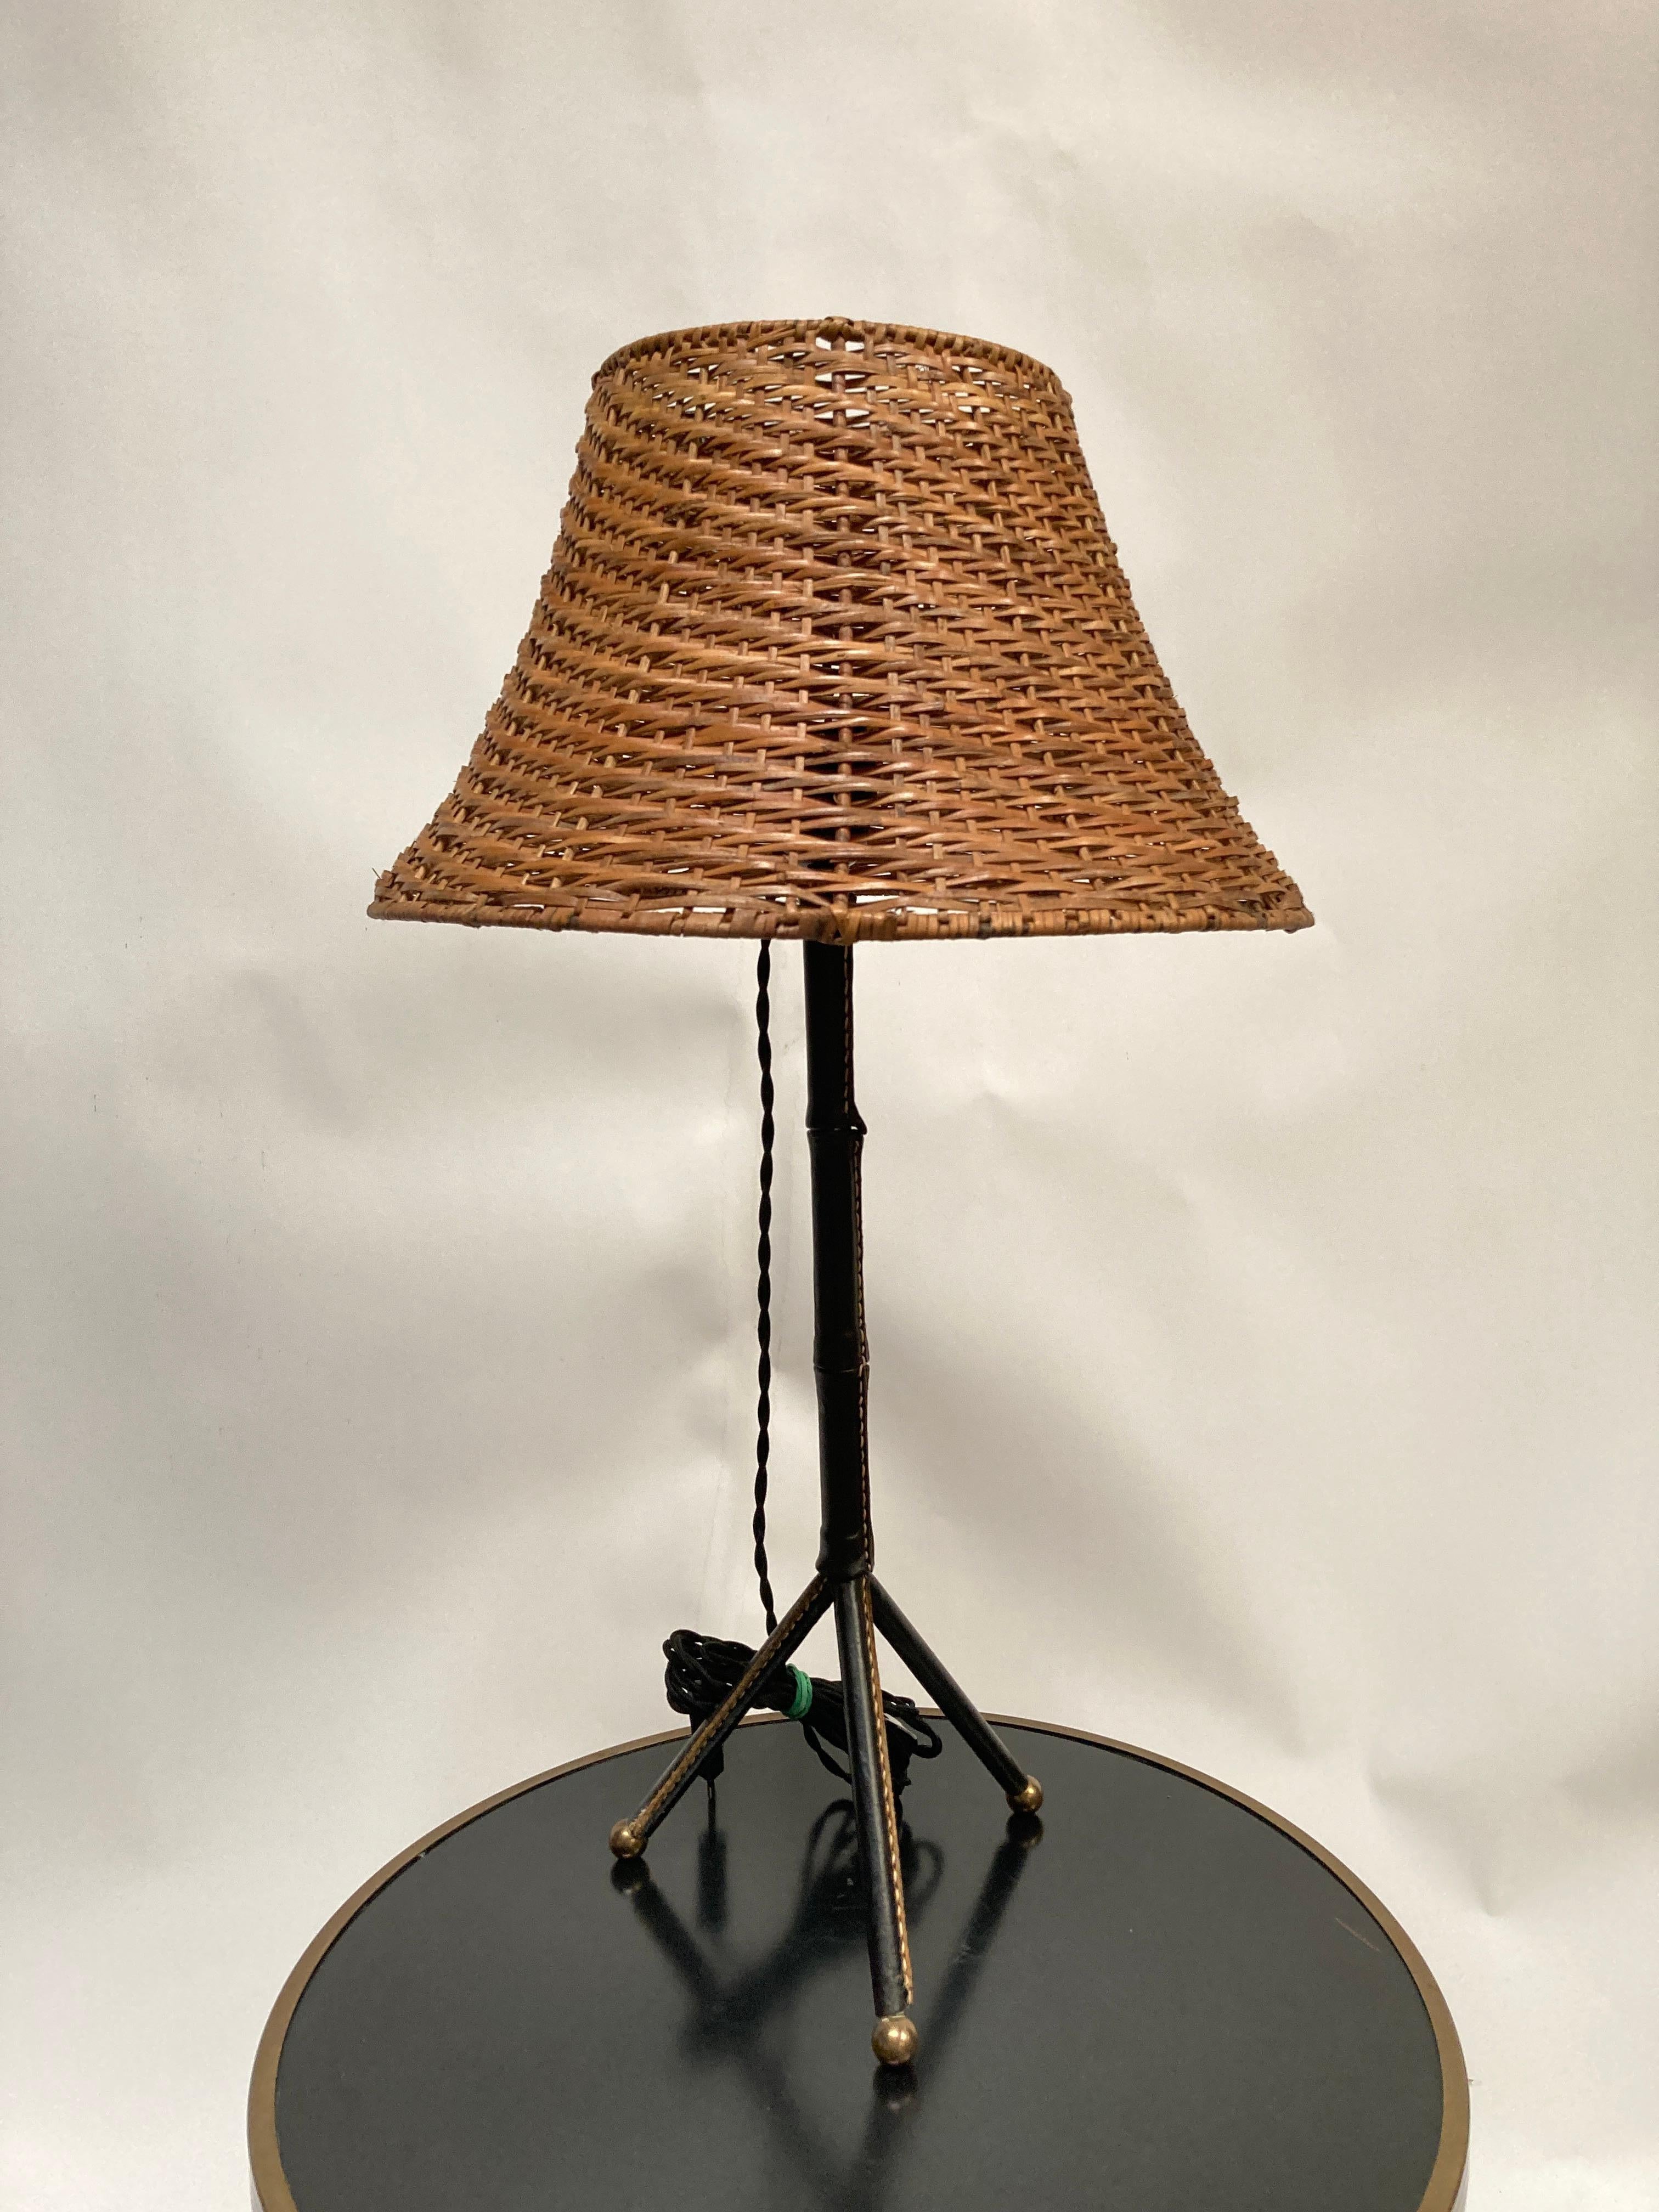 1950's Stitched leather table lamp by Jacques Adnet
Great condition
France
dimensions given without shade
No shade included
re-wired